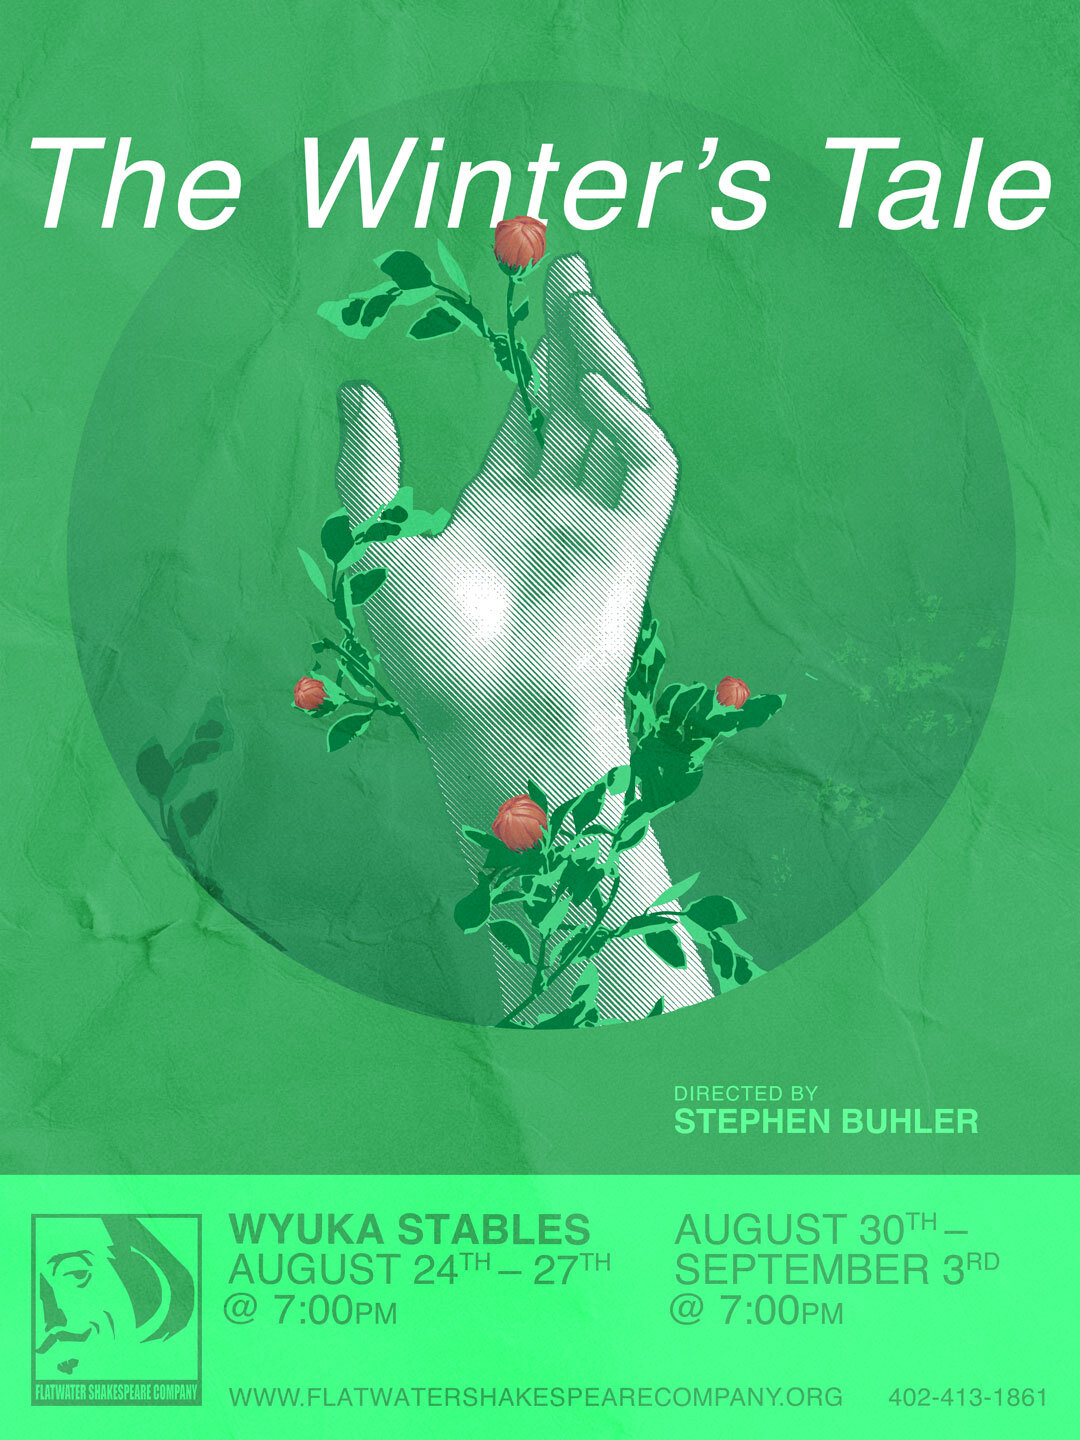 9/1 KID - KIDS (10 and Under): Friday. September 1, 2023 | 7:00 p.m. - 10:00 p.m. CST | Wyuka Stables (The Winter's Tale)